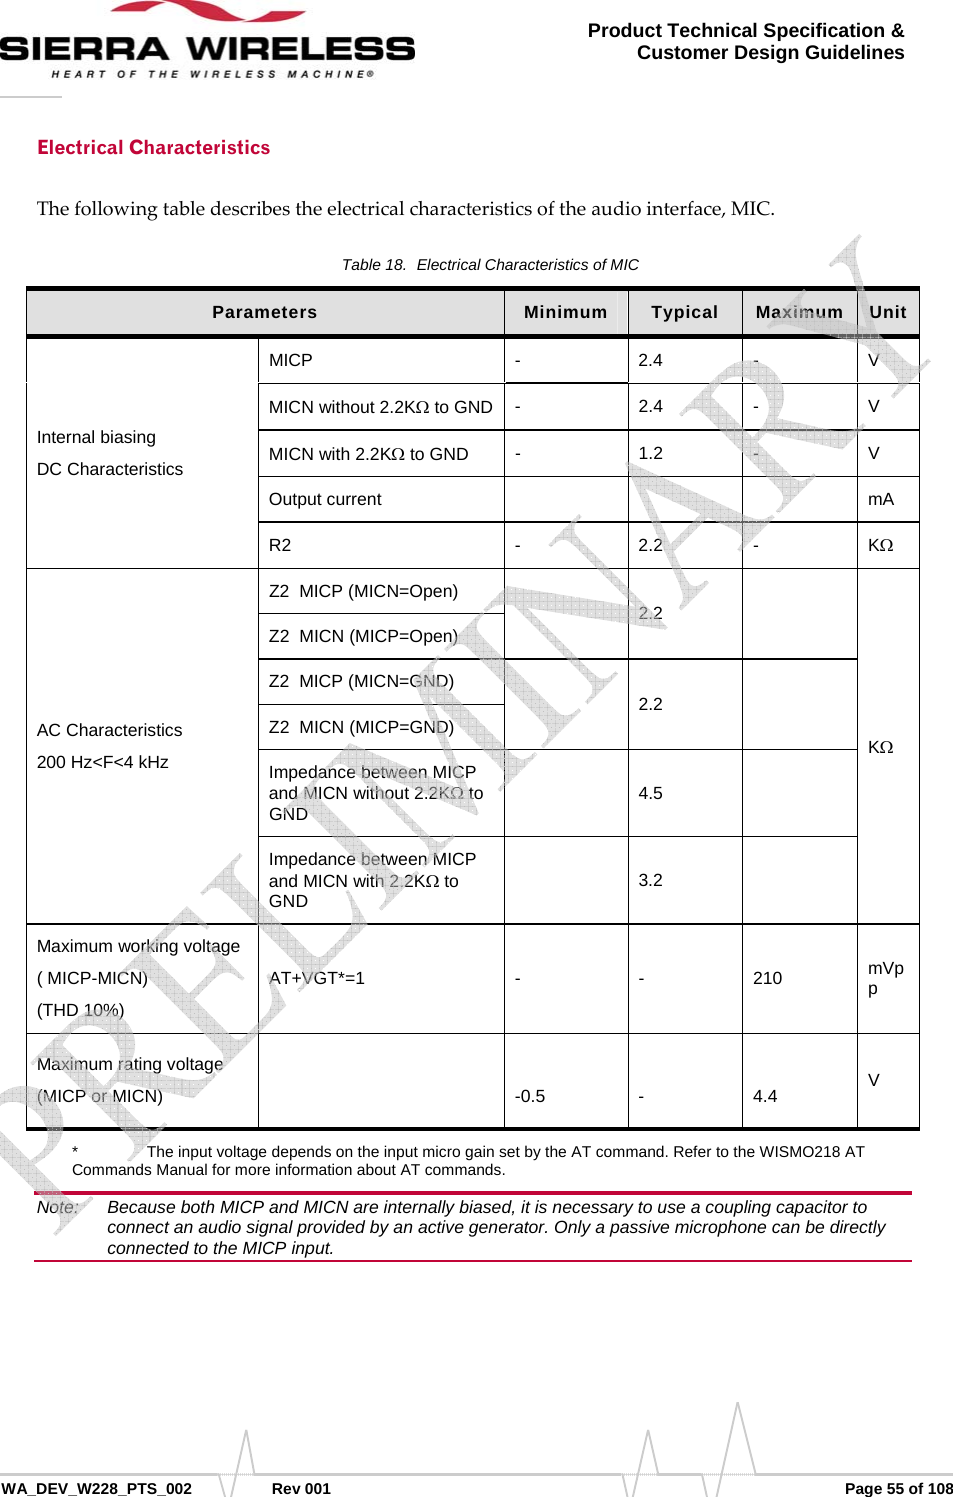      WA_DEV_W228_PTS_002 Rev 001  Page 55 of 108 Product Technical Specification &amp; Customer Design Guidelines Electrical Characteristics Thefollowingtabledescribestheelectricalcharacteristicsoftheaudiointerface,MIC.Table 18.  Electrical Characteristics of MIC Parameters  Minimum  Typical  Maximum  Unit Internal biasing  DC Characteristics MICP - 2.4 - V MICN without 2.2KΩ to GND  - 2.4 - V MICN with 2.2KΩ to GND  - 1.2 - V Output current        mA R2 - 2.2 - KΩ AC Characteristics 200 Hz&lt;F&lt;4 kHz Z2  MICP (MICN=Open)  2.2  KΩ Z2  MICN (MICP=Open) Z2  MICP (MICN=GND)  2.2  Z2  MICN (MICP=GND) Impedance between MICP and MICN without 2.2KΩ to GND   4.5  Impedance between MICP and MICN with 2.2KΩ to GND   3.2  Maximum working voltage  ( MICP-MICN) (THD 10%)  AT+VGT*=1  - -  210  mVpp Maximum rating voltage (MICP or MICN)    -0.5  -  4.4  V *    The input voltage depends on the input micro gain set by the AT command. Refer to the WISMO218 AT Commands Manual for more information about AT commands. Note:   Because both MICP and MICN are internally biased, it is necessary to use a coupling capacitor to connect an audio signal provided by an active generator. Only a passive microphone can be directly connected to the MICP input.    